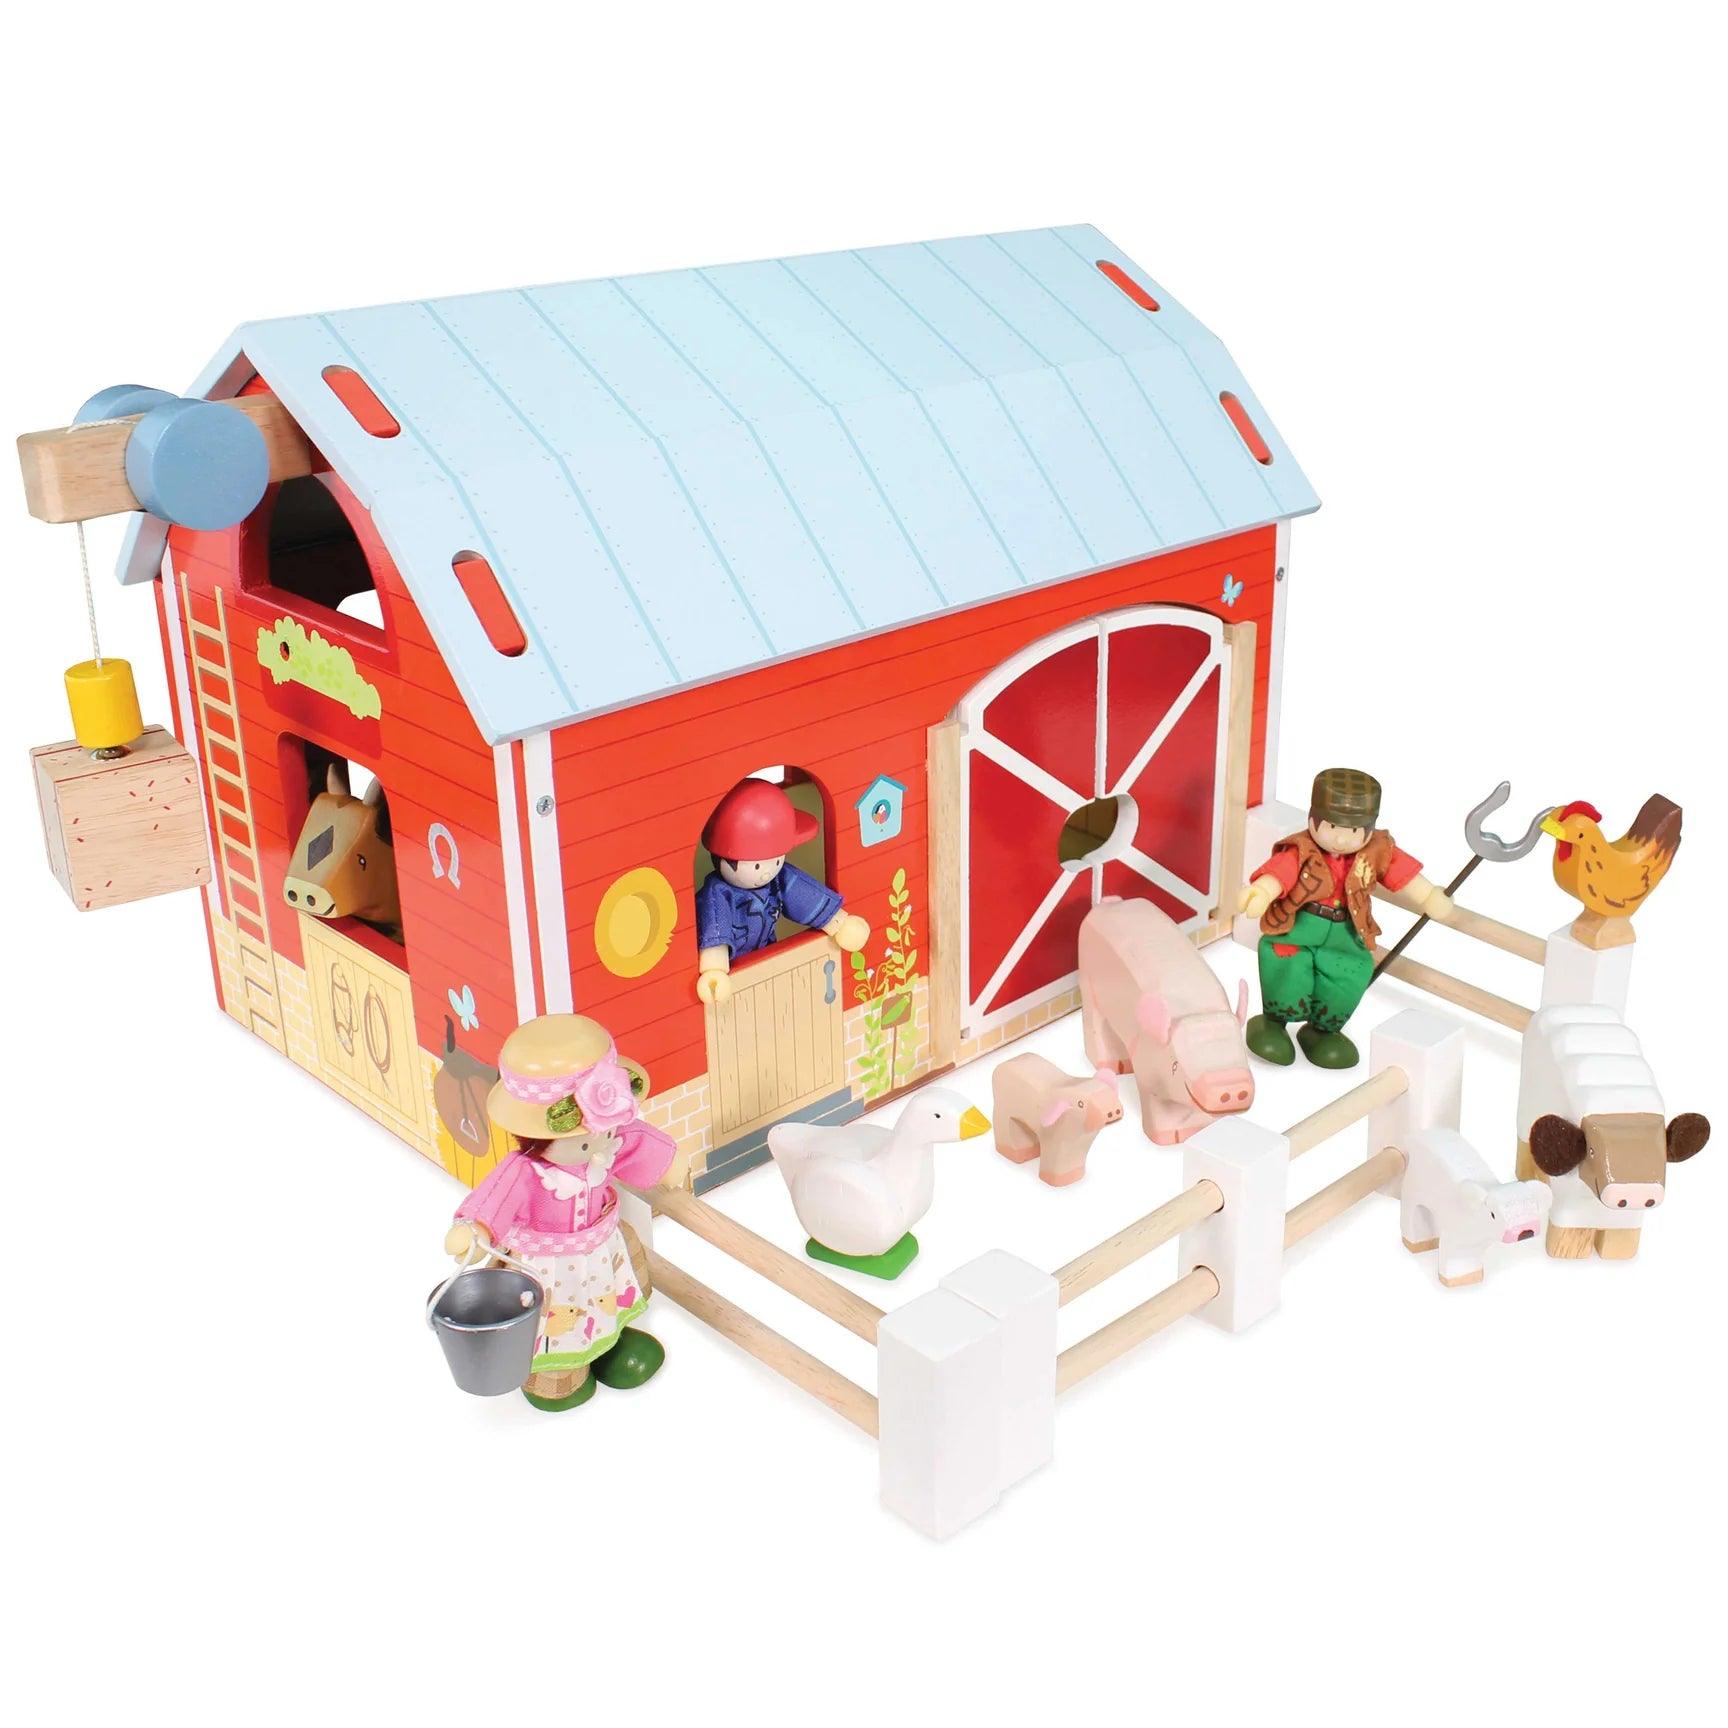 Red Barn Toy Farm - Gigglewick Gallery